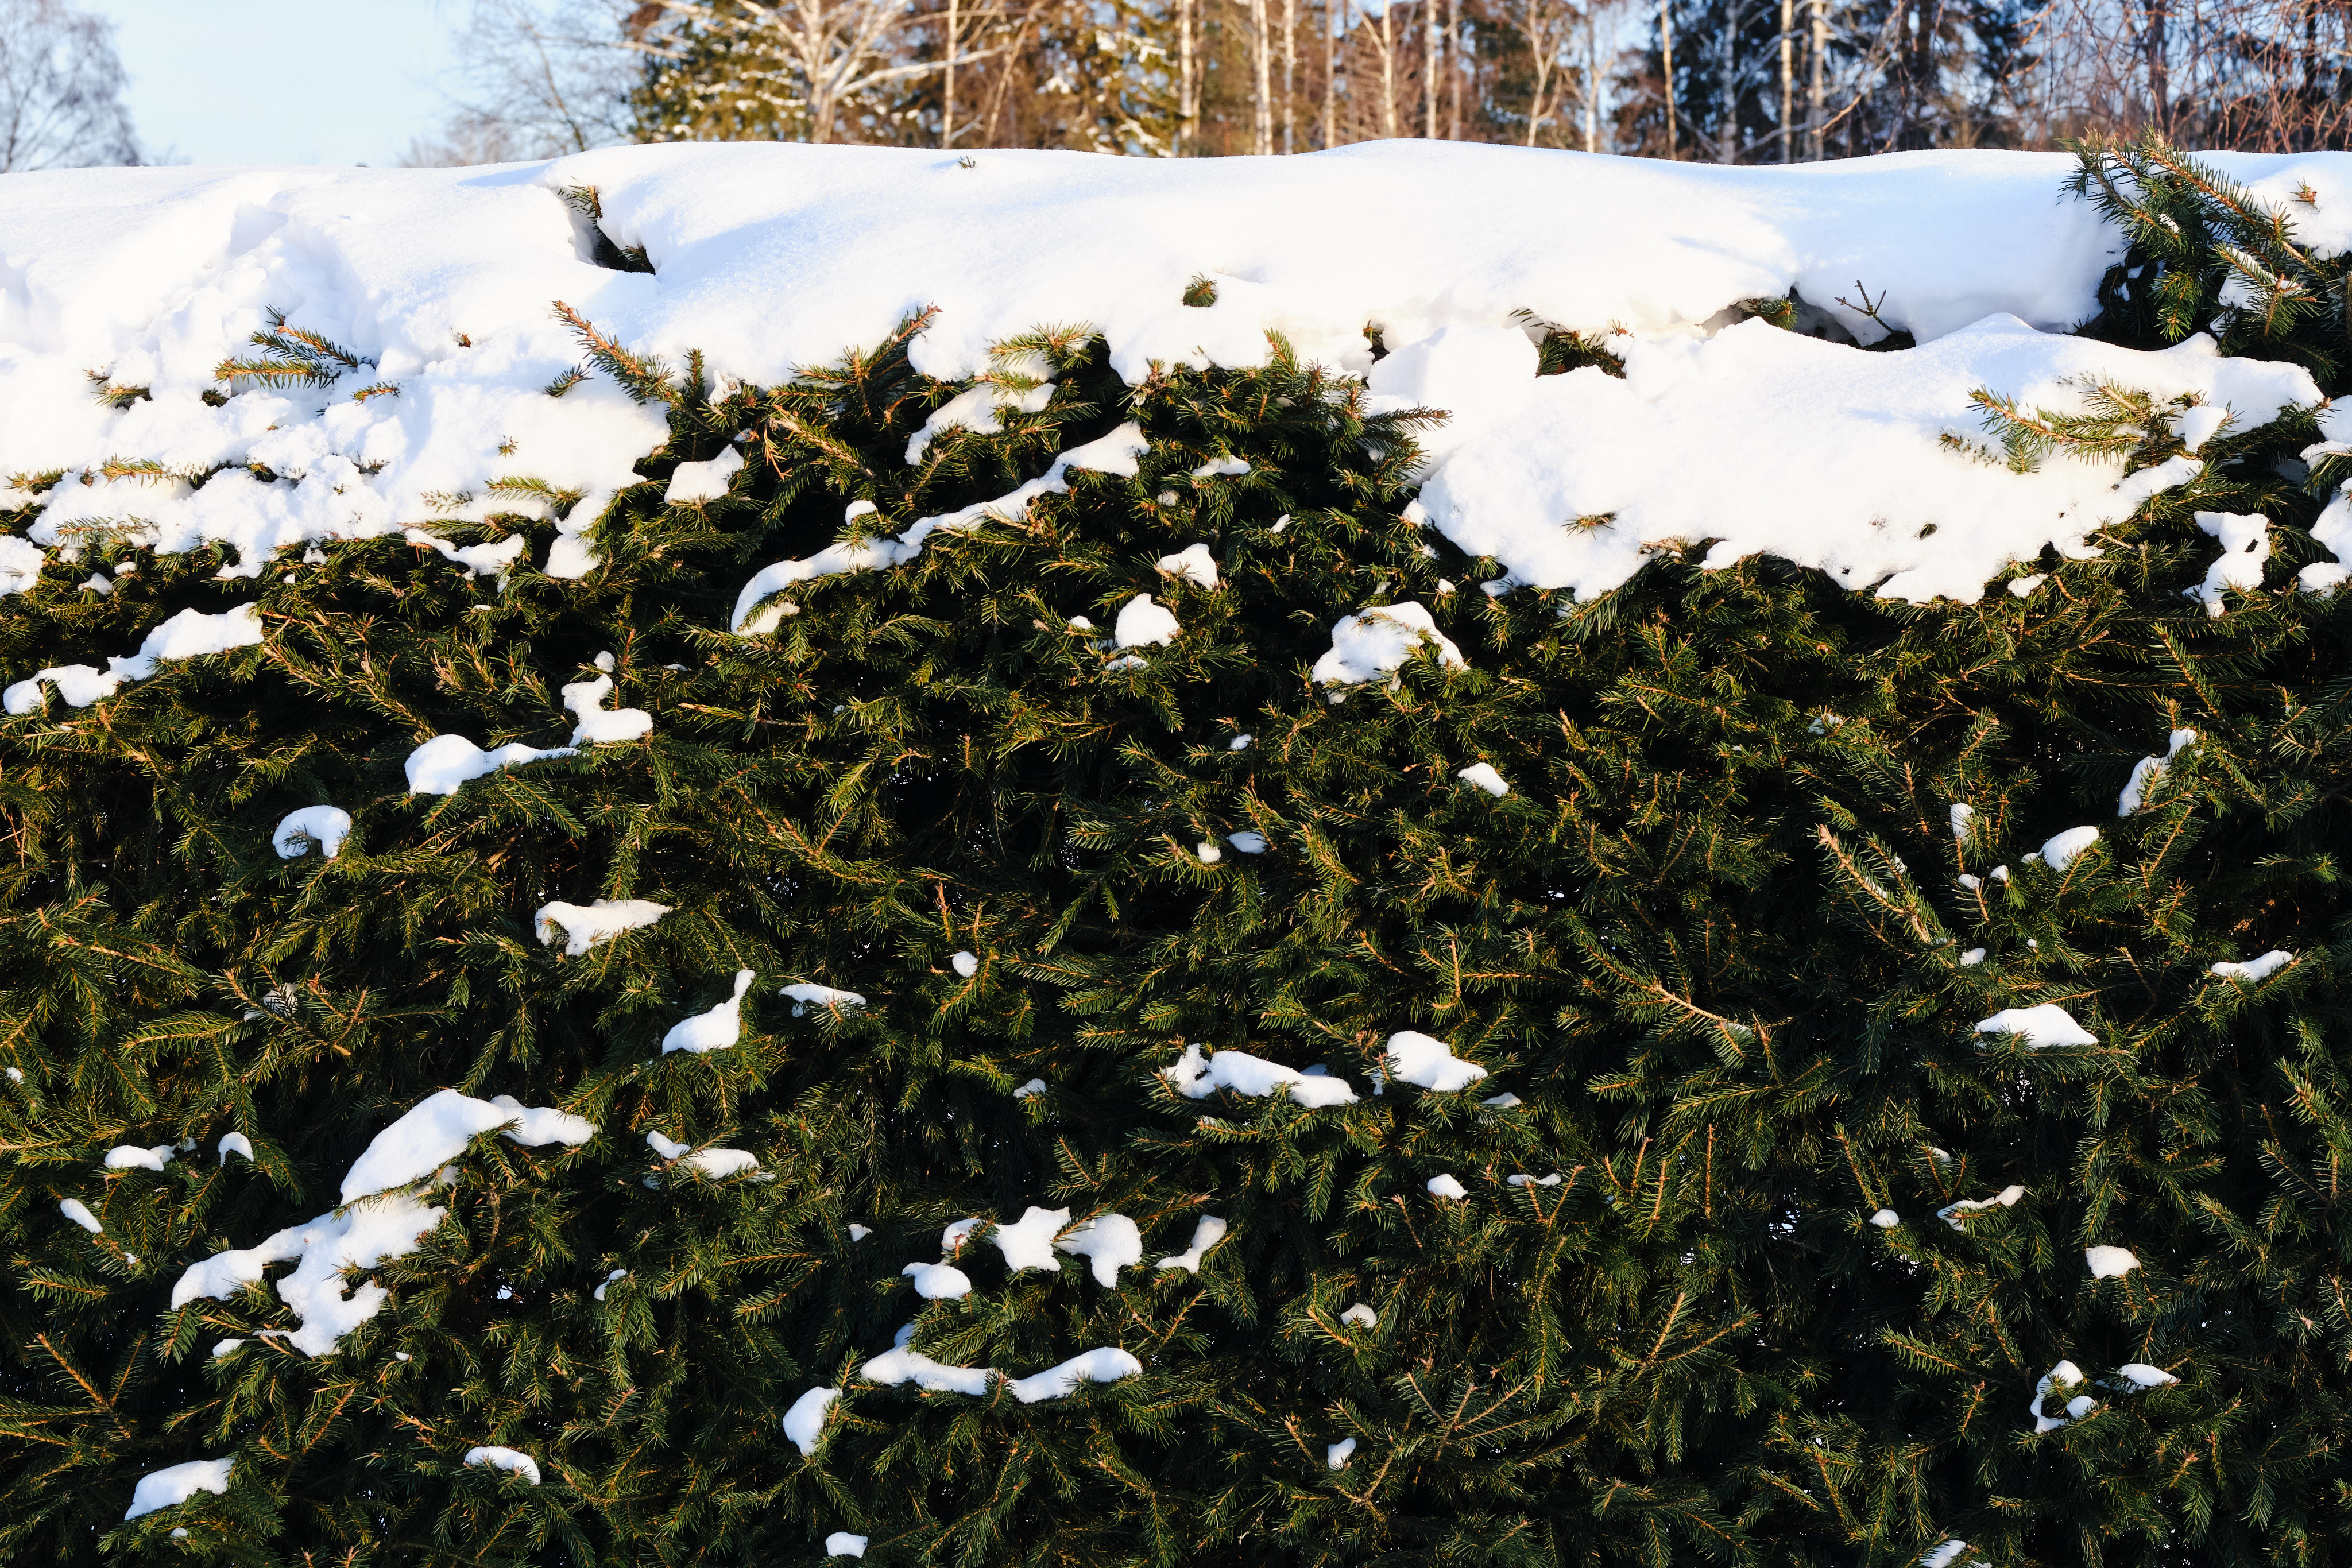 A snowy spruce hedge.